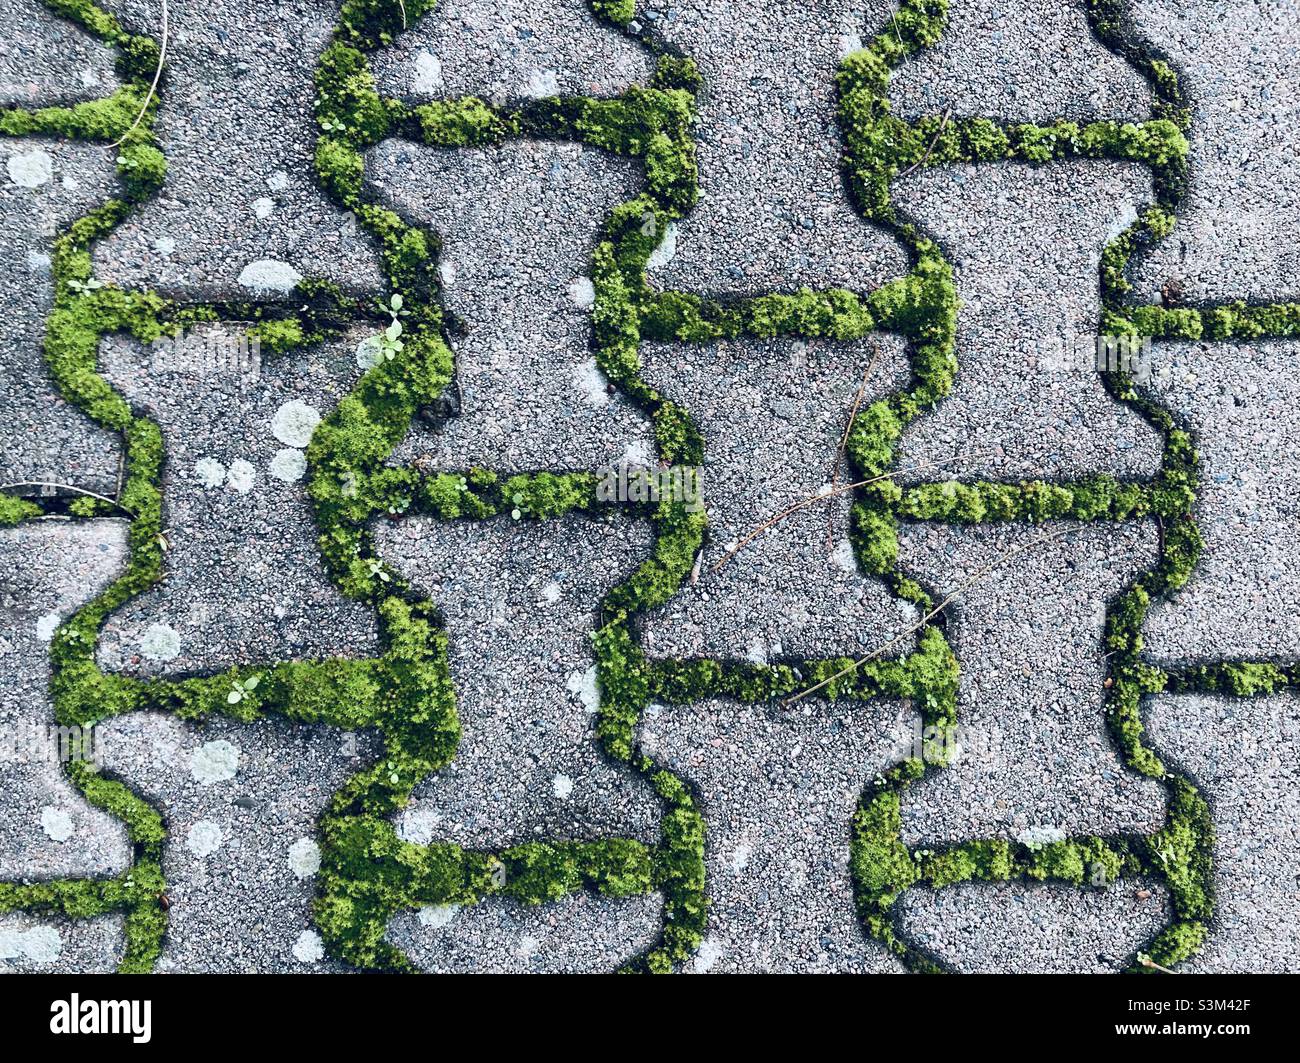 Paving stones overgrown with moss Stock Photo